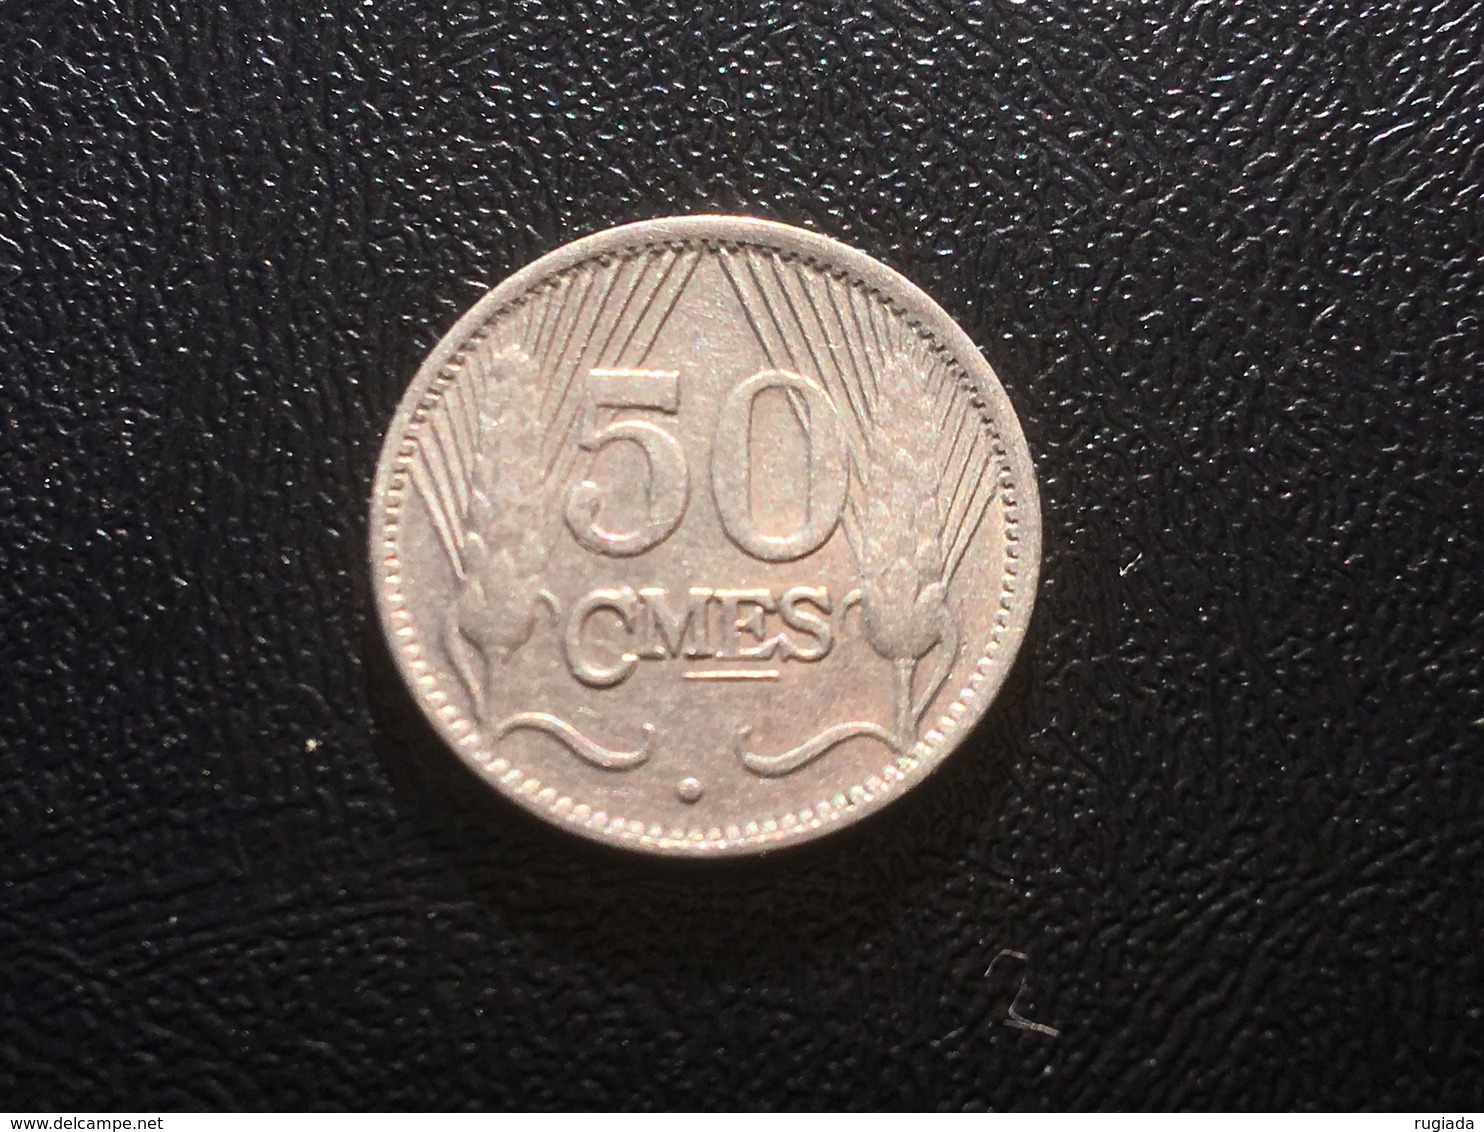 1930 Luxembourg 50 Centimes Coin - Luxembourg